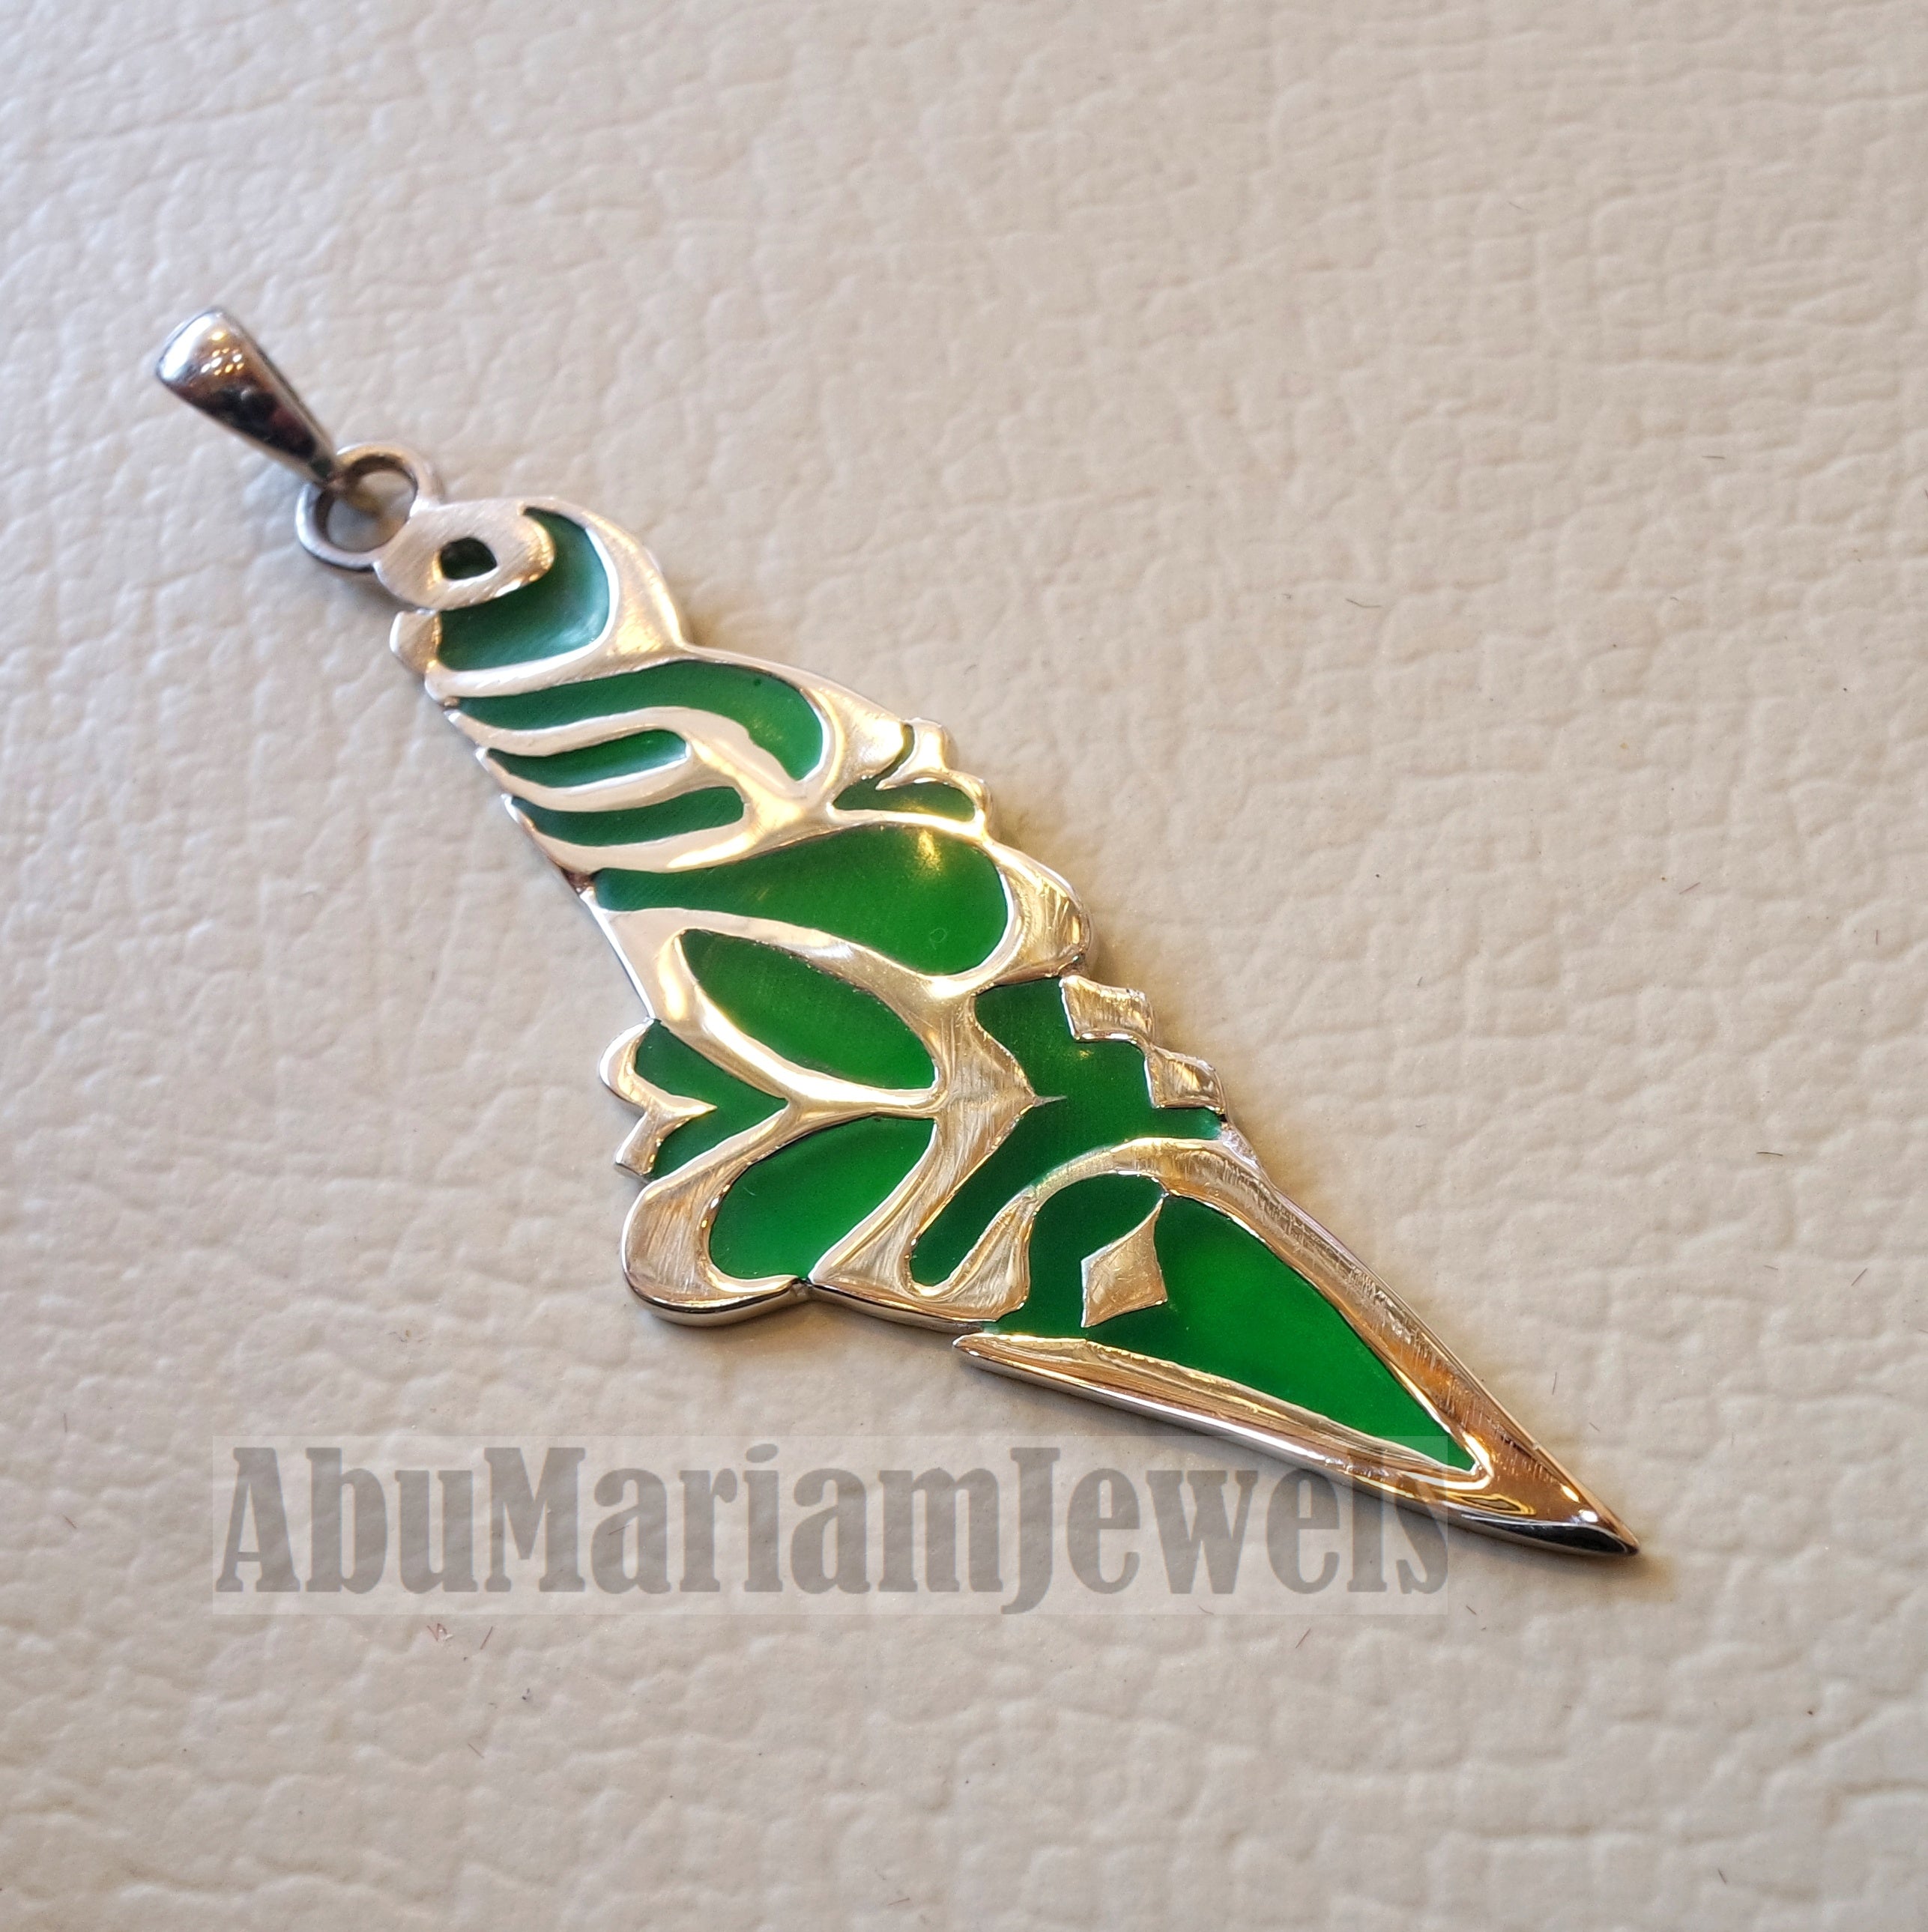 Palestine map pendant sterling silver 925 k high quality with green enamel jewelry arabic calligraphy fast shipping خارطه فلسطين